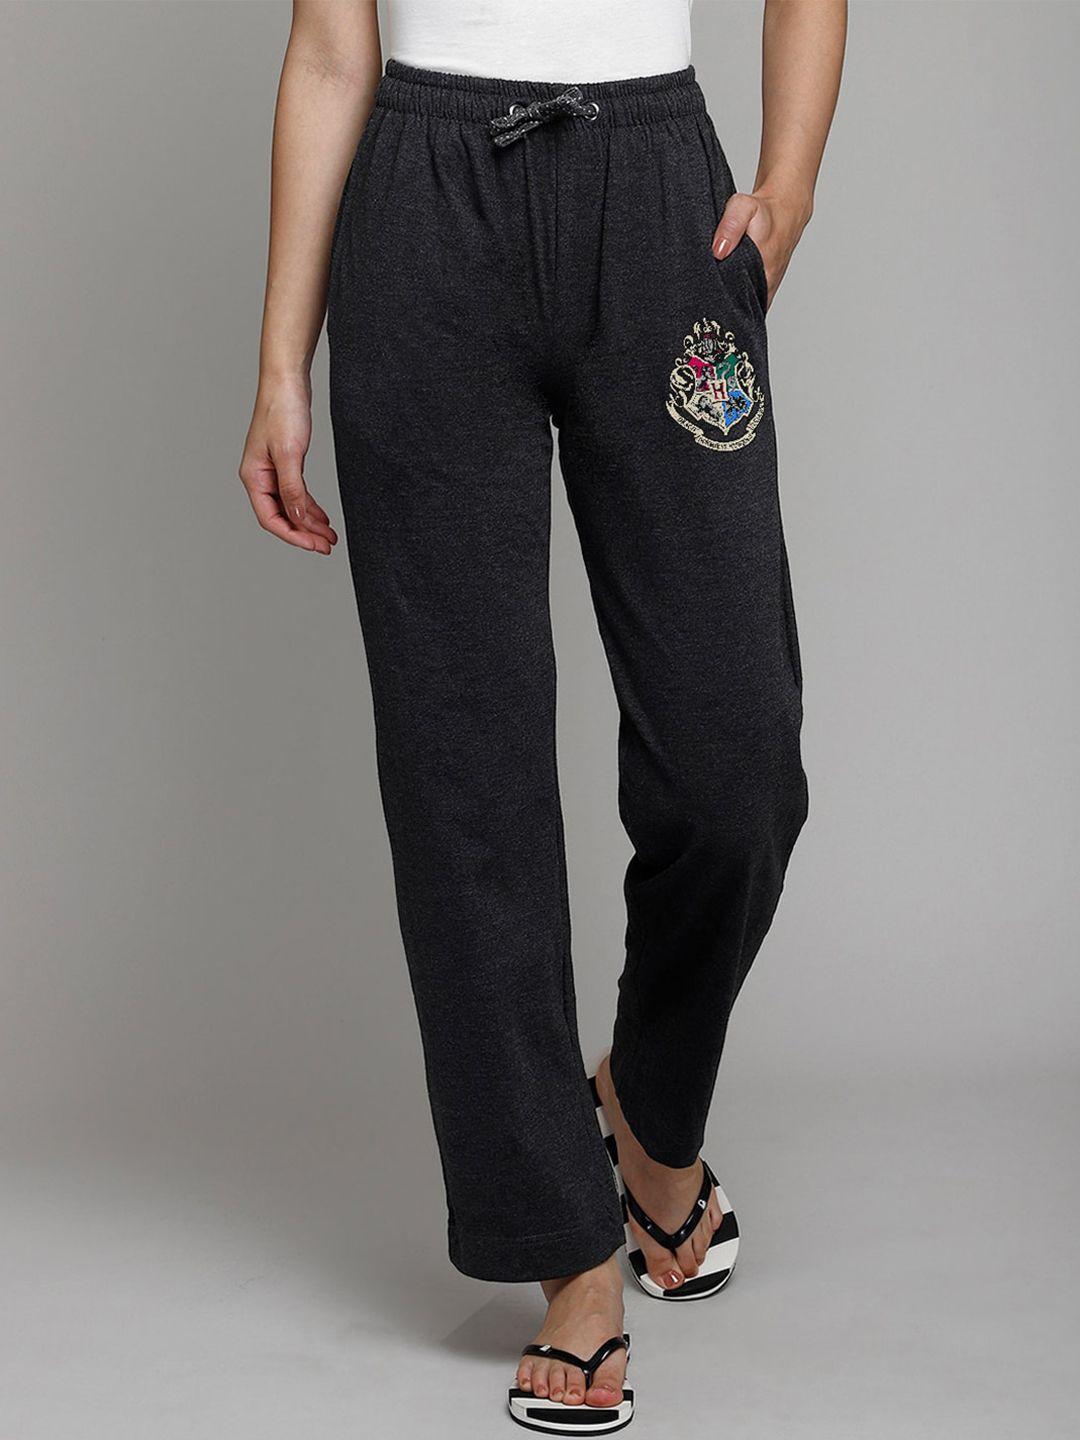 free authority women grey harry potter printed lounge pants